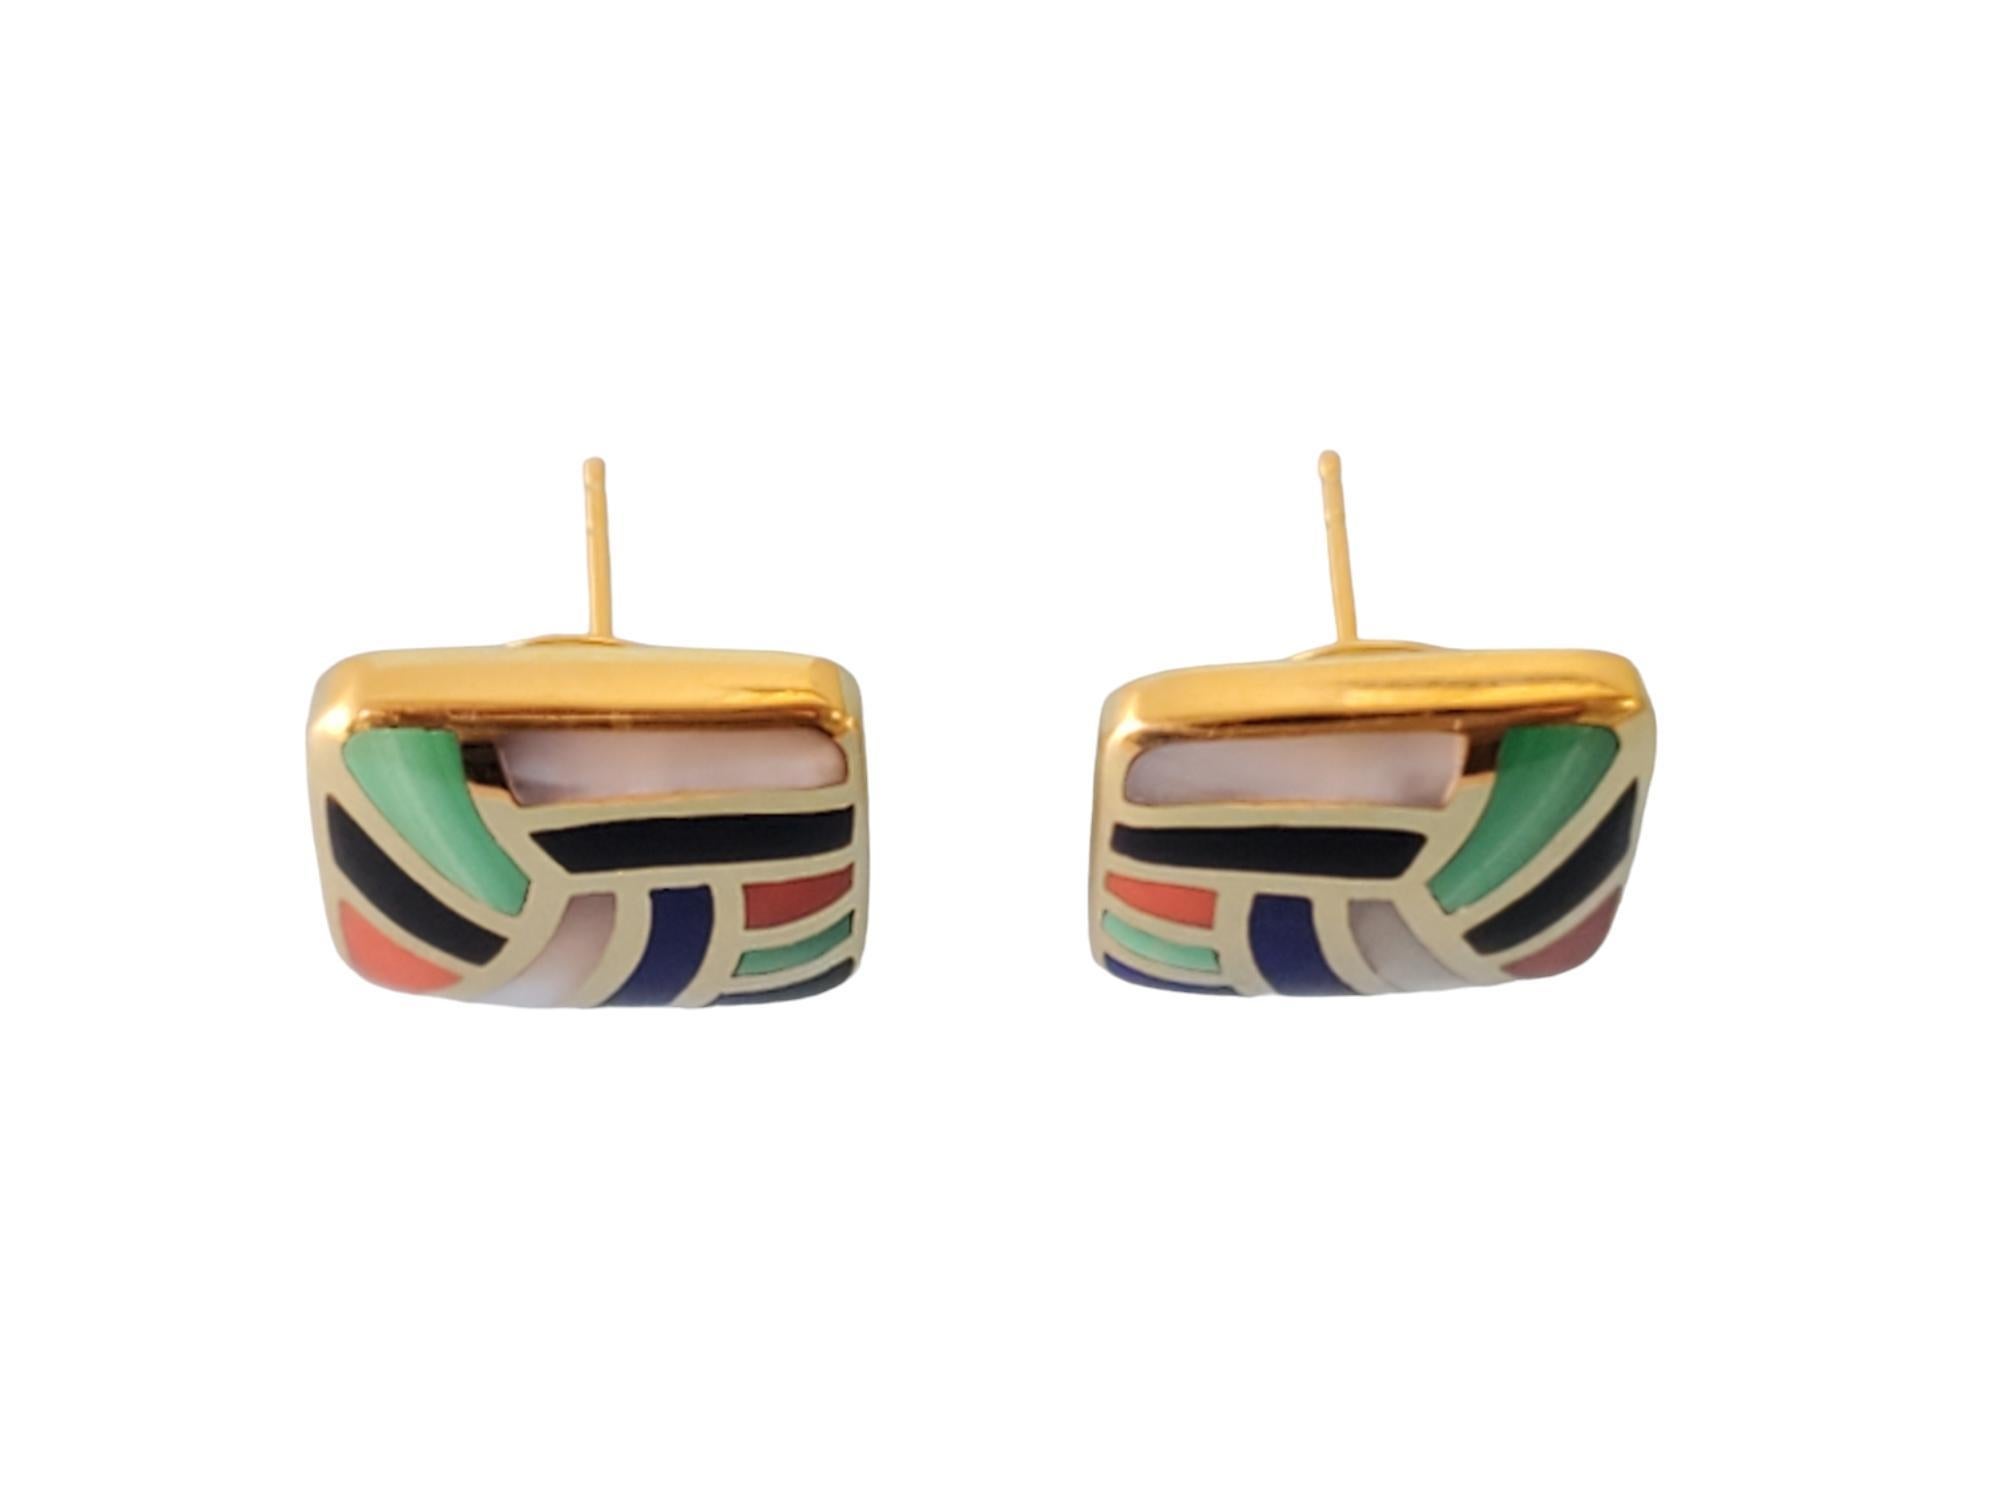 Asch Grossbardt Earrings 14k Yellow Gold Multi-Stone Inlay Design In Good Condition For Sale In Overland Park, KS